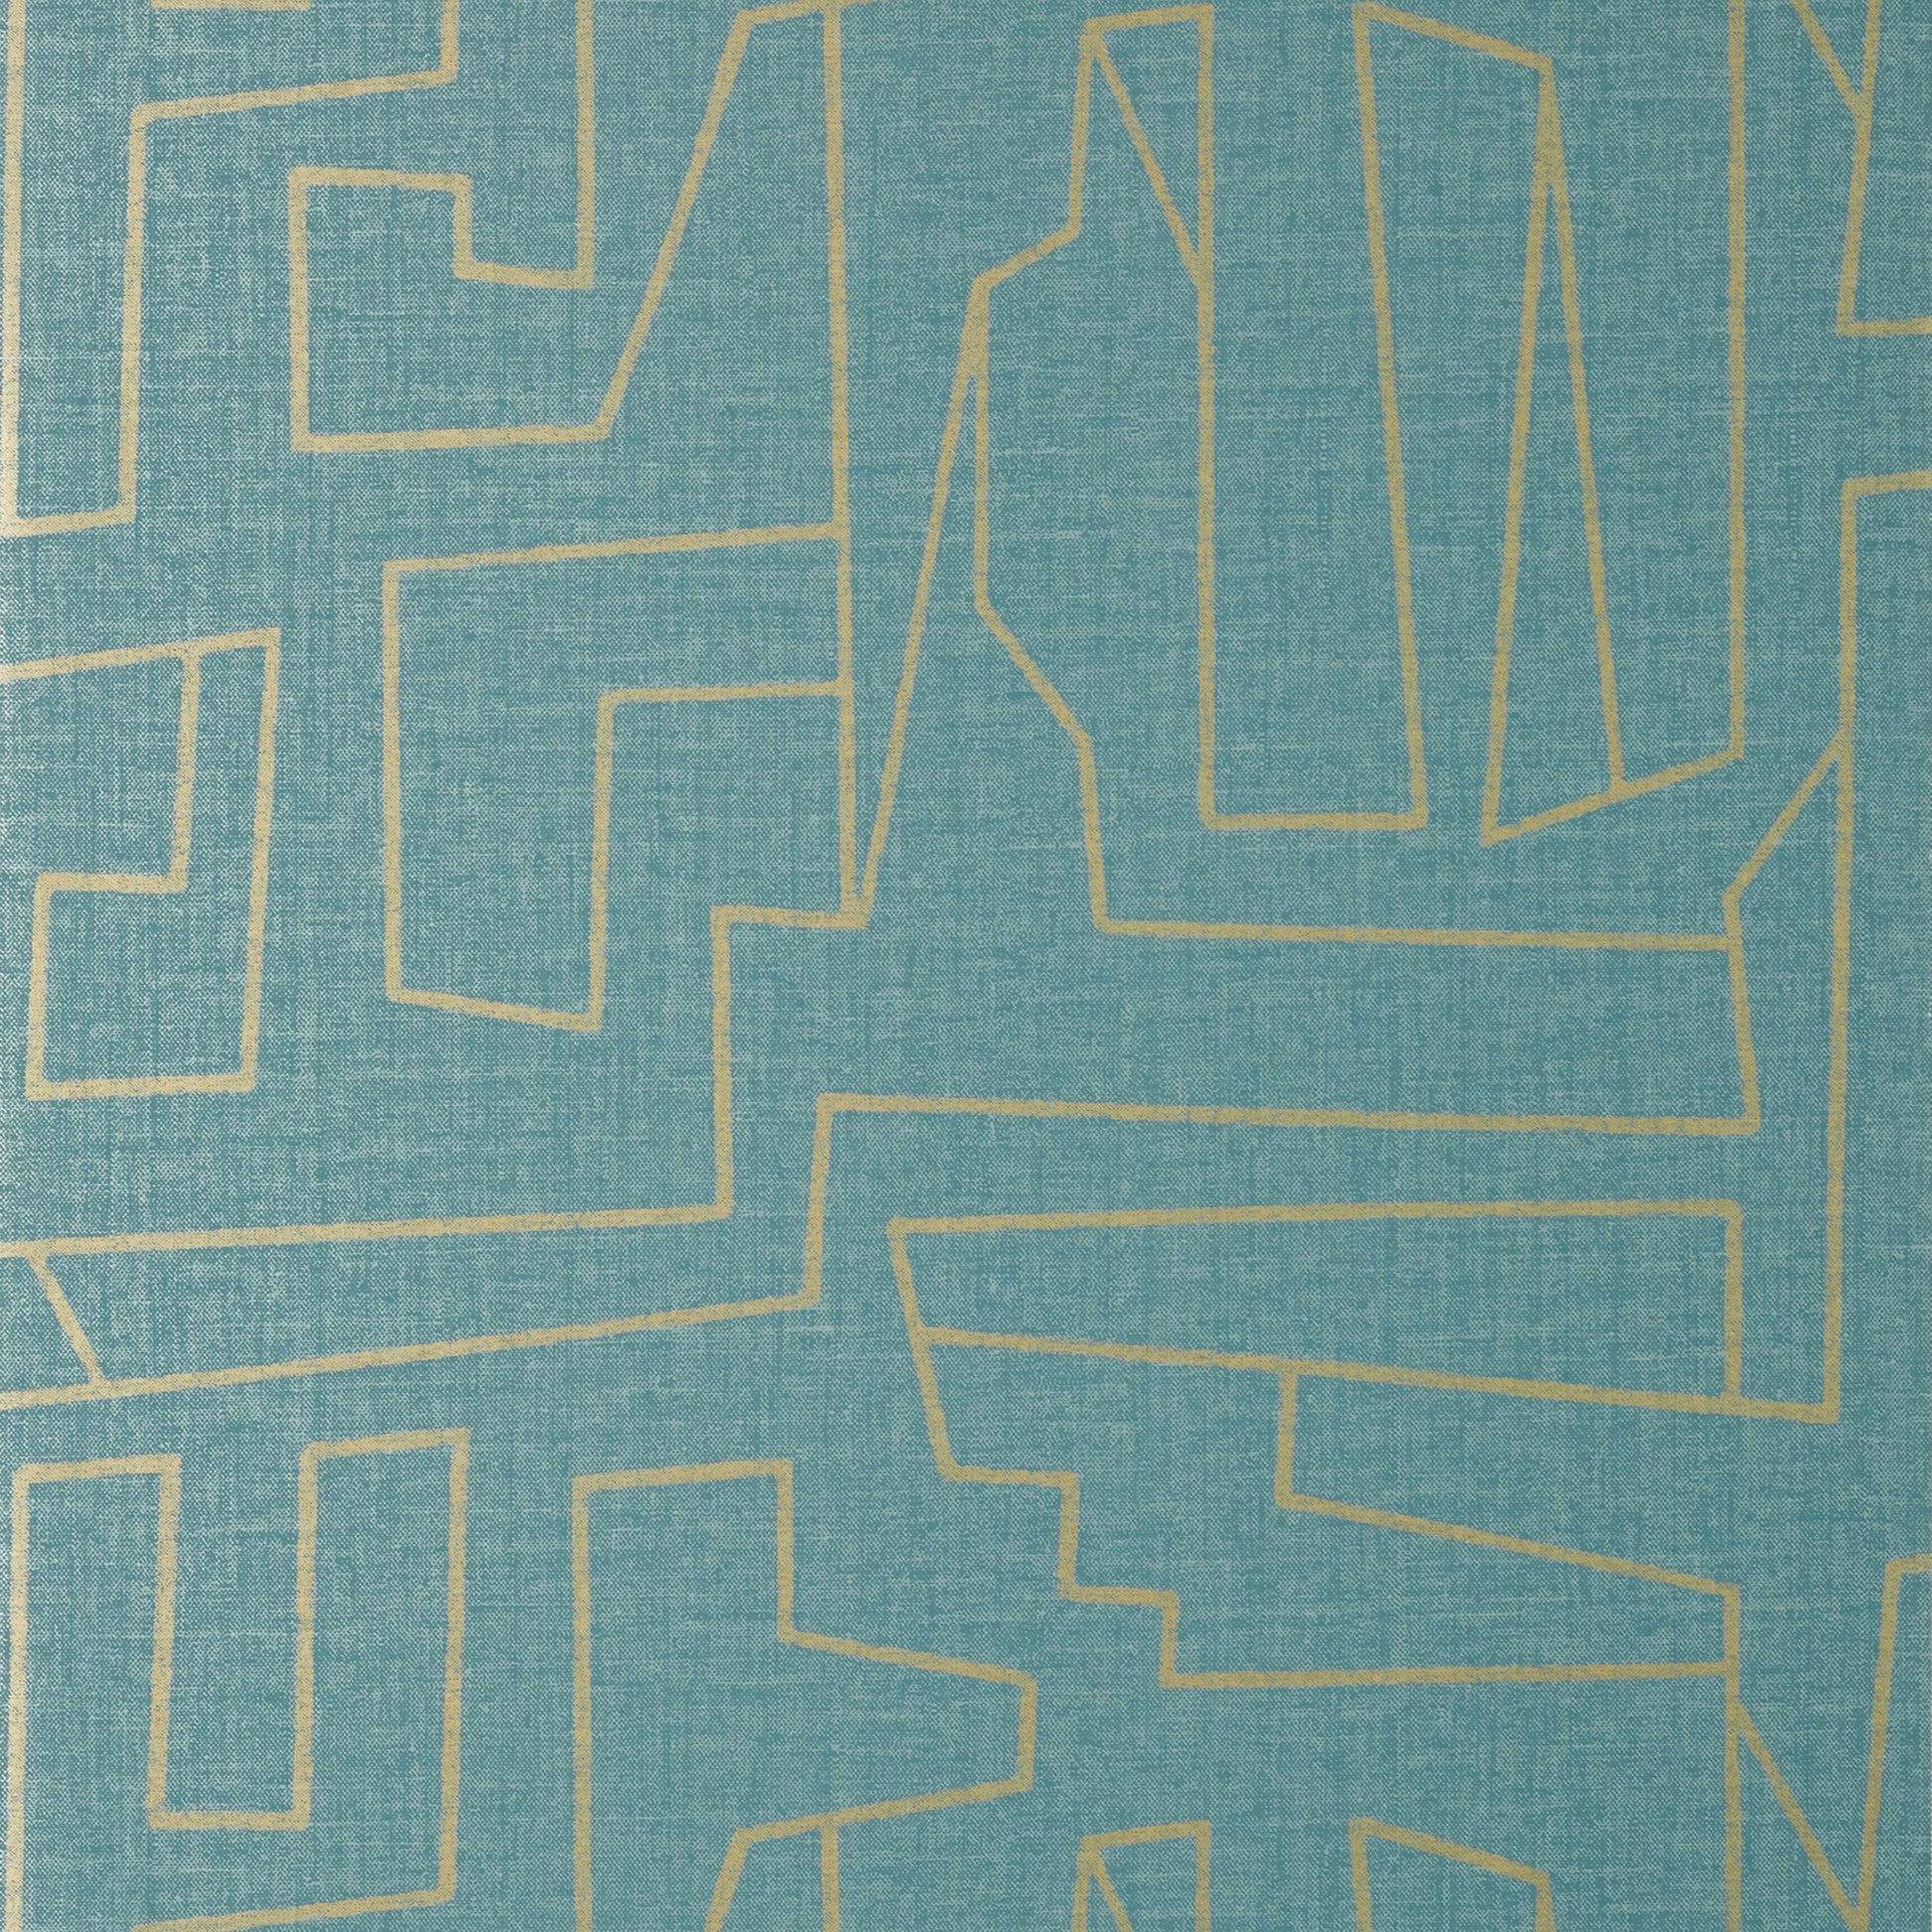 Purchase Thibaut Wallpaper Pattern# T41032 pattern name Matrix color Metallic Gold and Teal. 